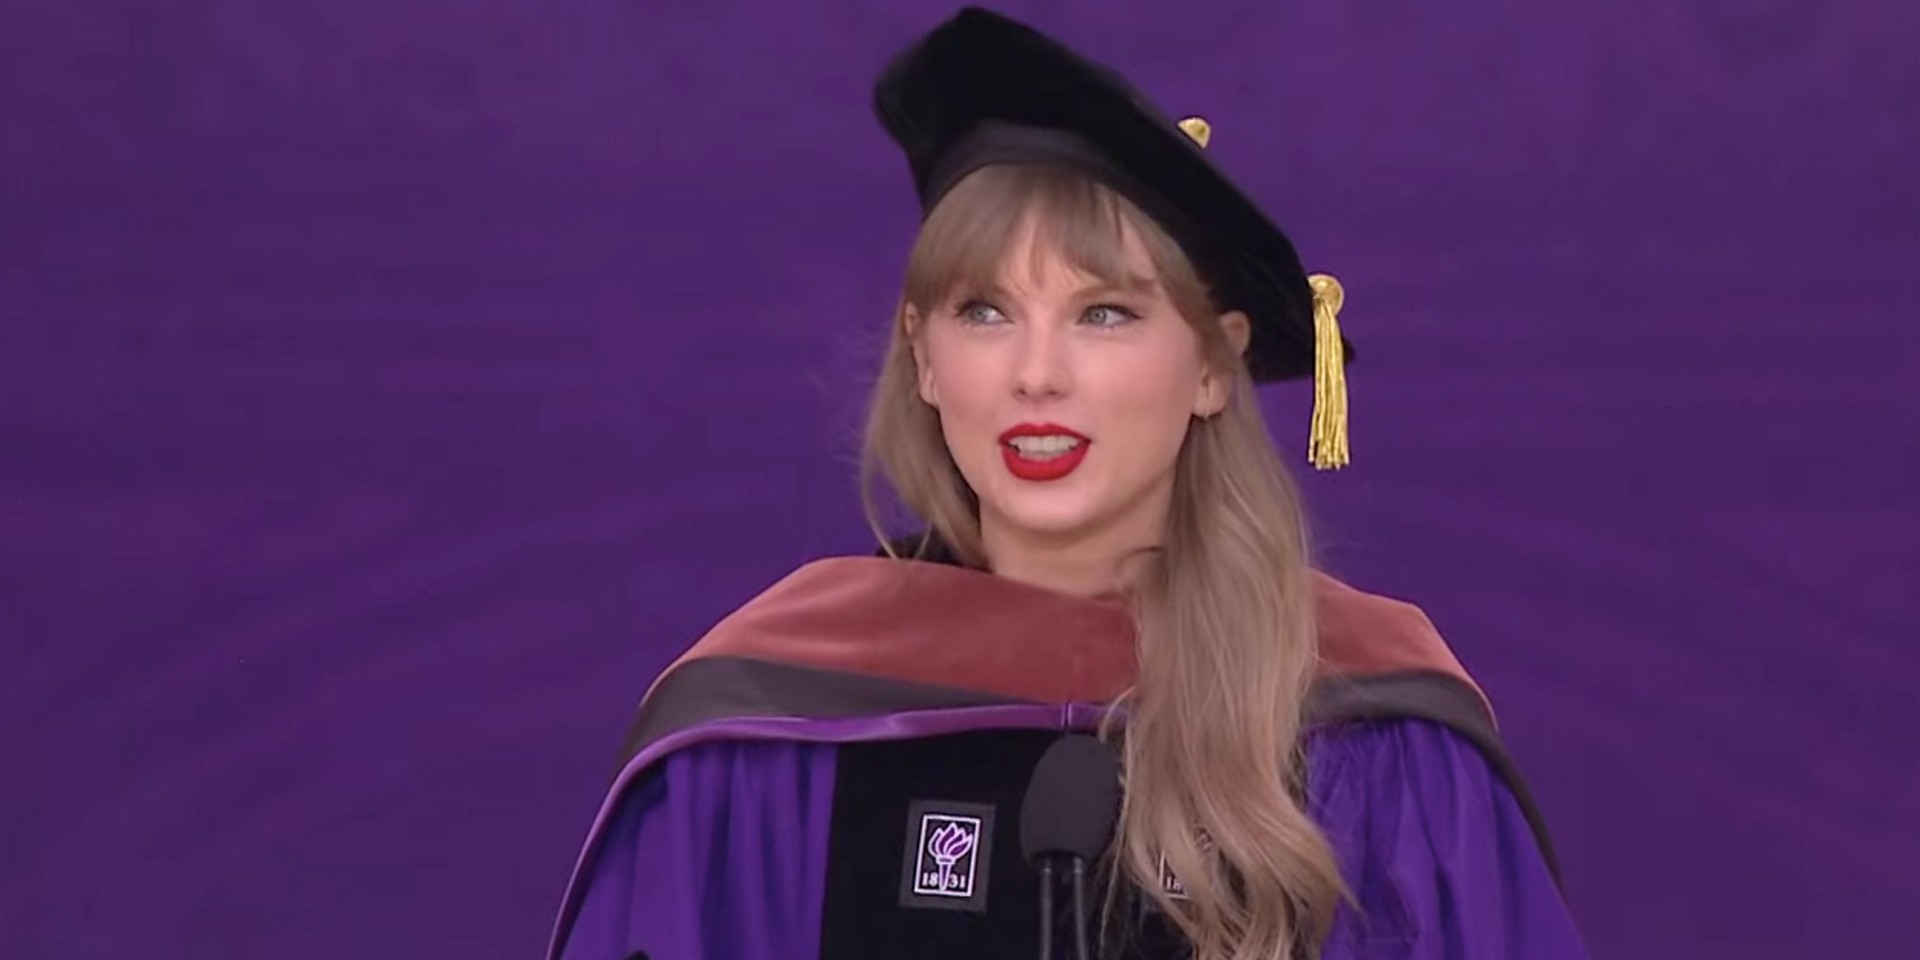 Taylor Swift gives commencement speech to New York University graduates: "Never be ashamed of trying, effortlessness is a myth."